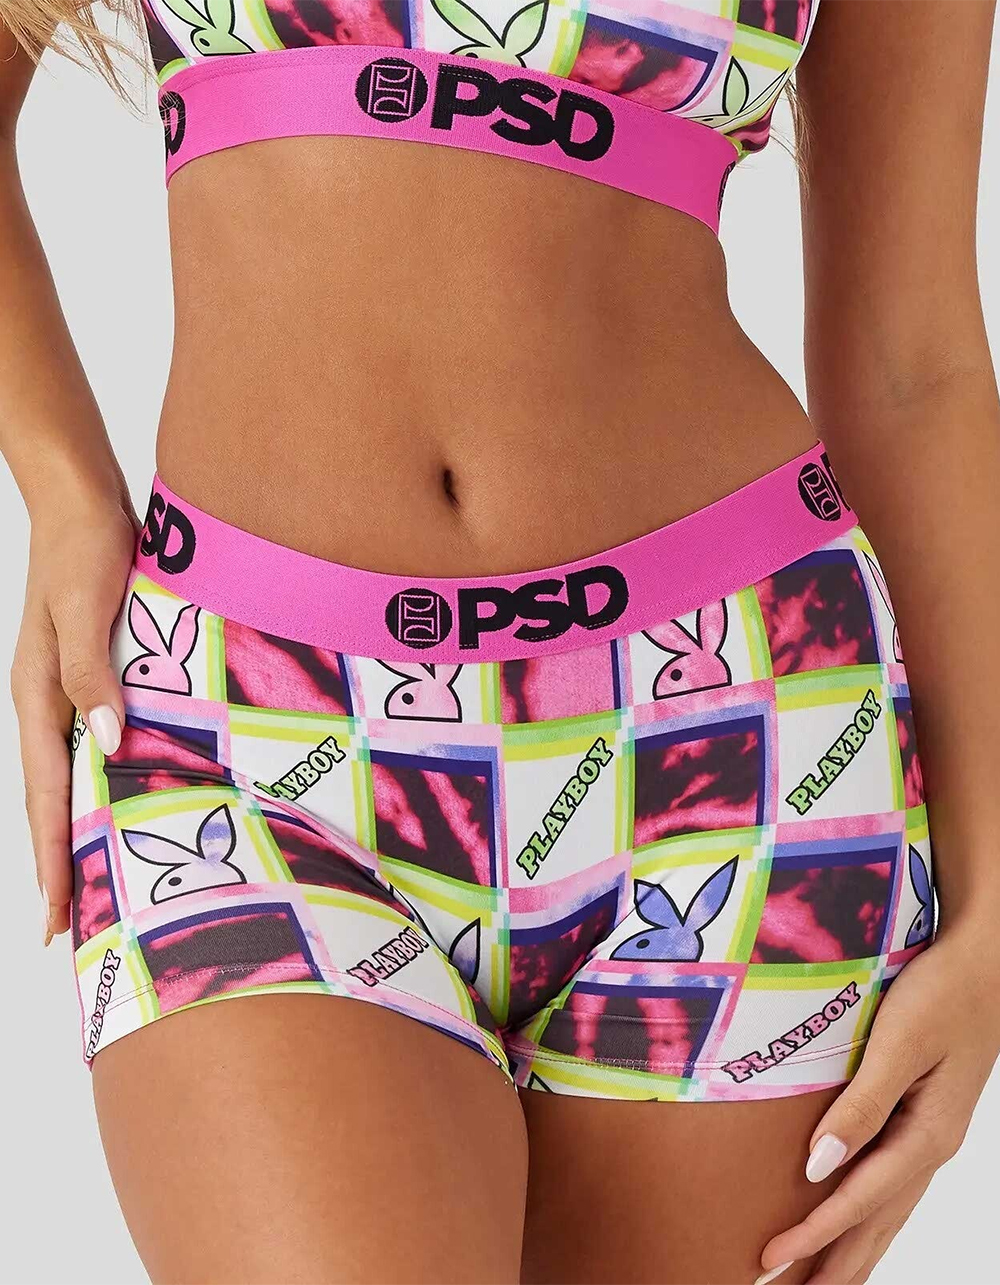 Womens psd boxers 